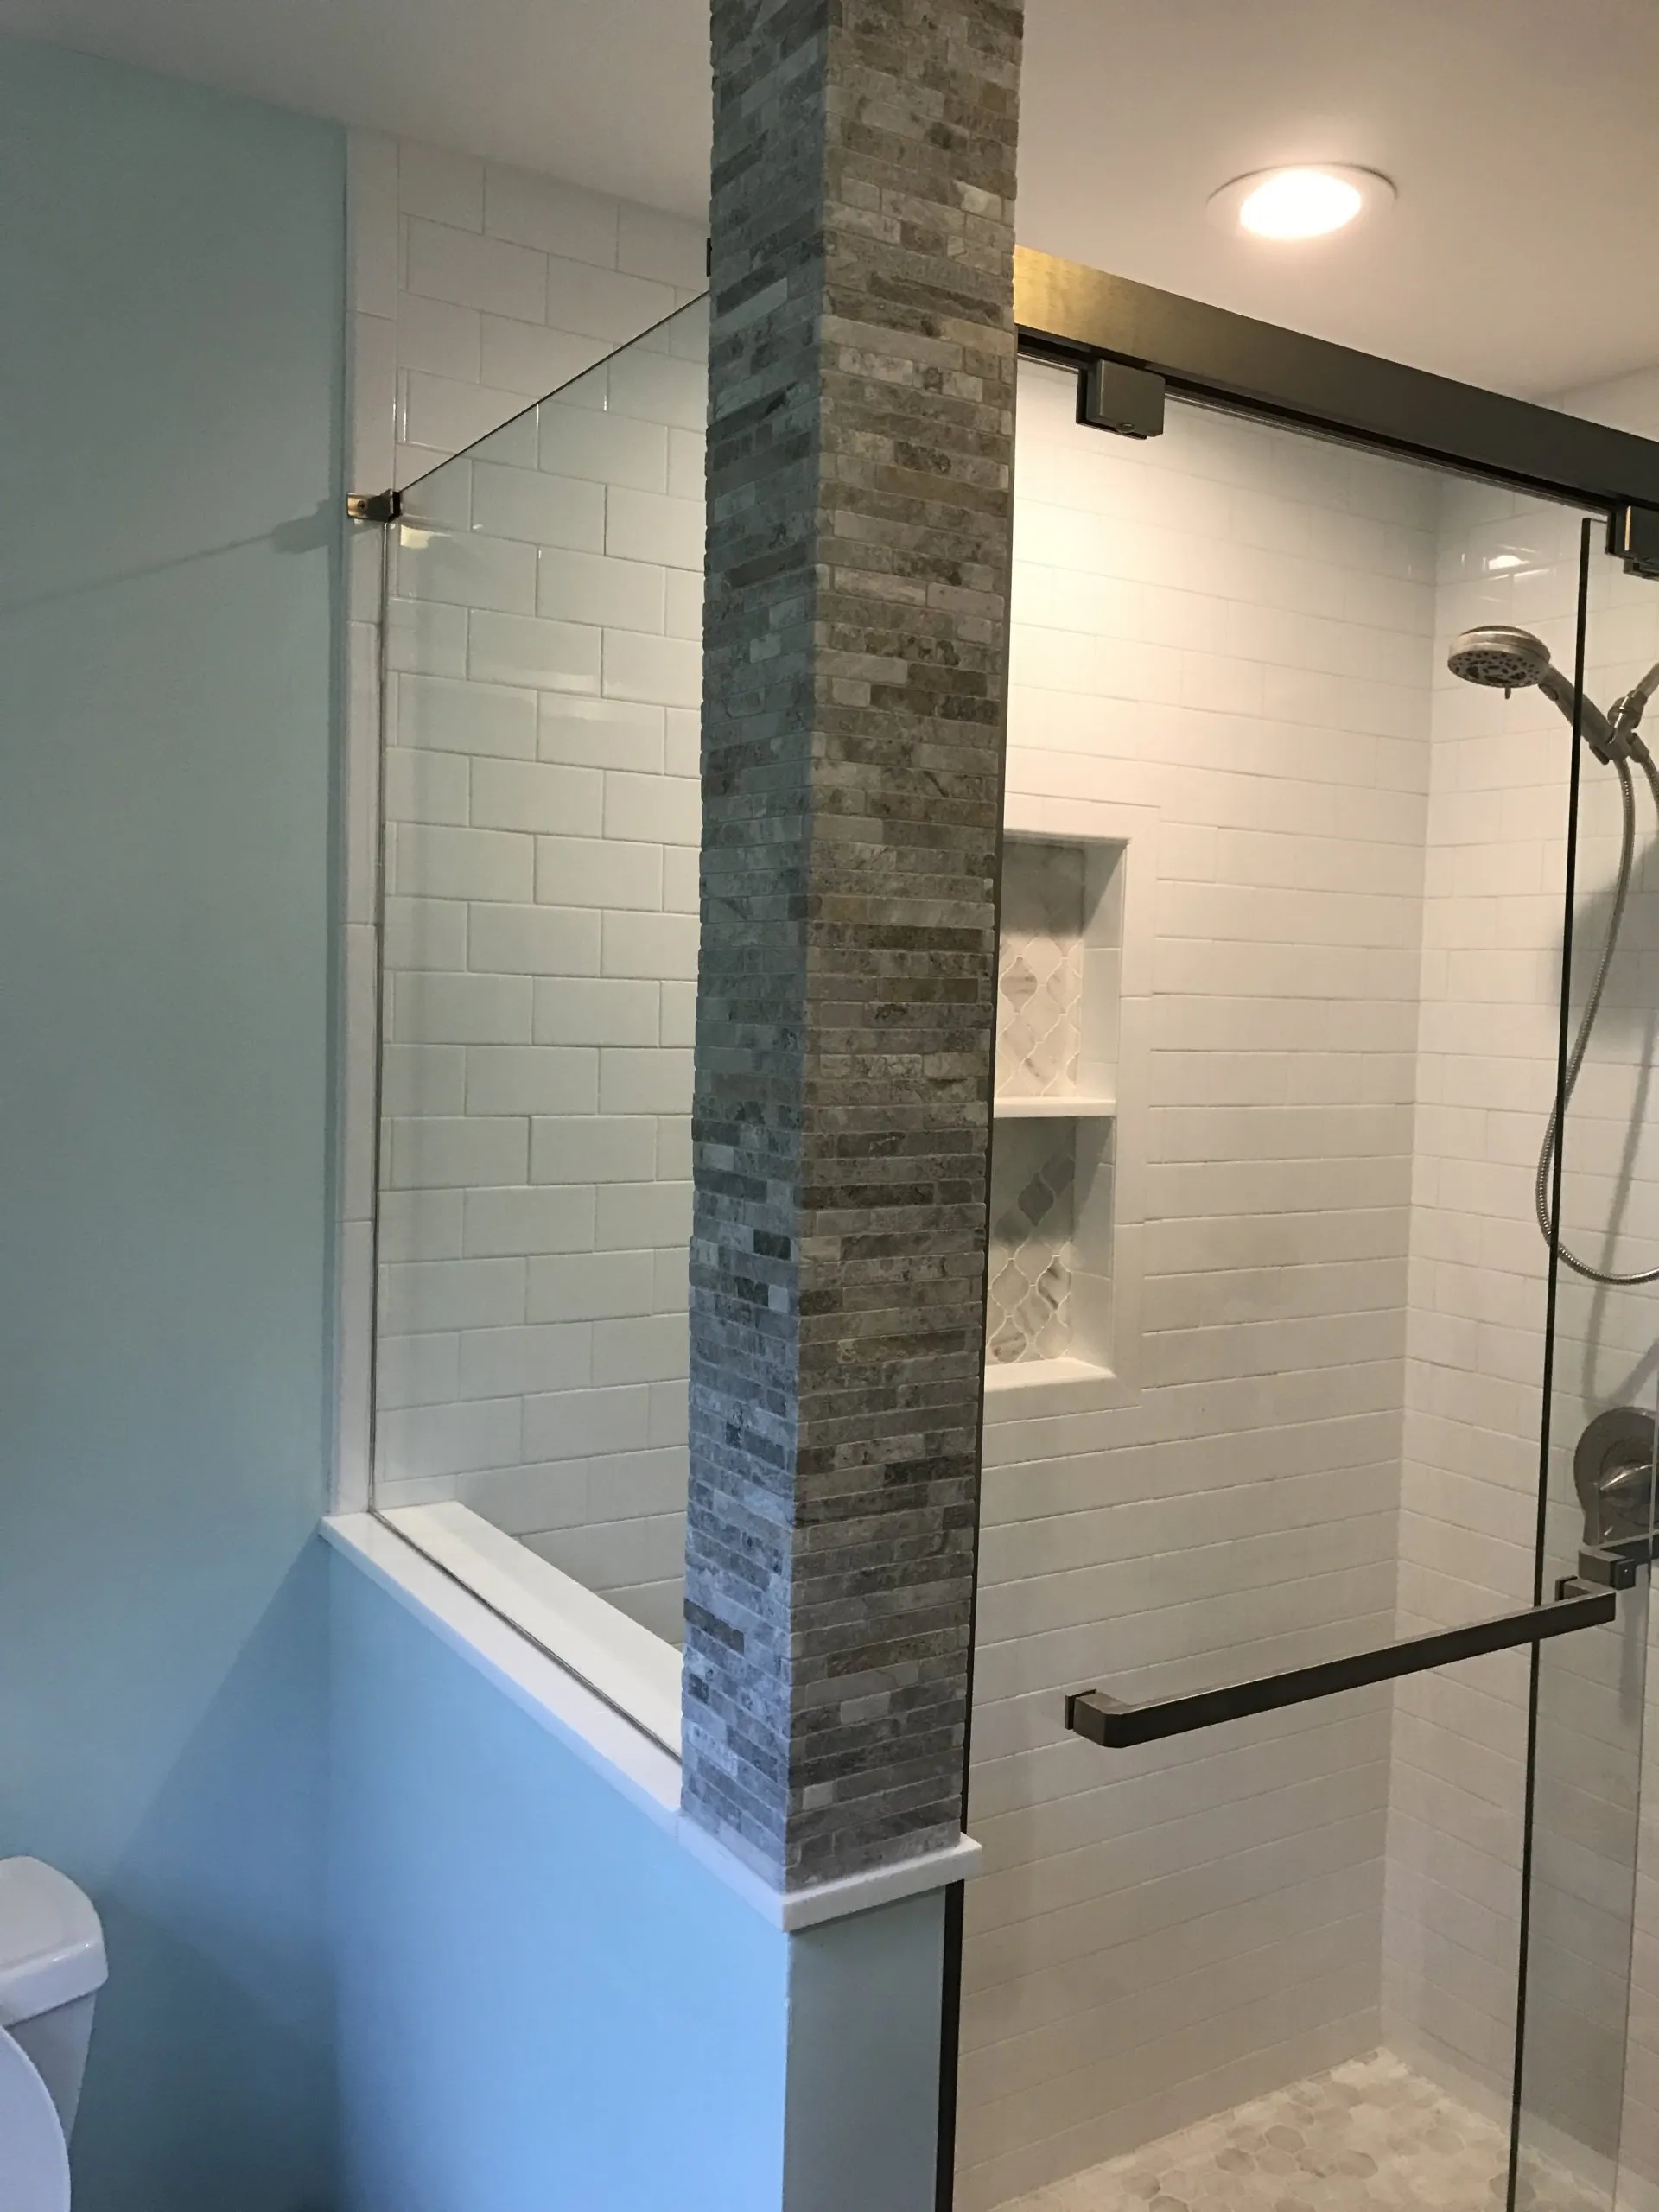 - Home Improvement Contractors in PA -  - Explore our Blog: Ault Signature Homes for Home Renovations - Home Improvement Contractors in PA -  - A Complete Bathroom Remodel Checklist for PA Homeowners 